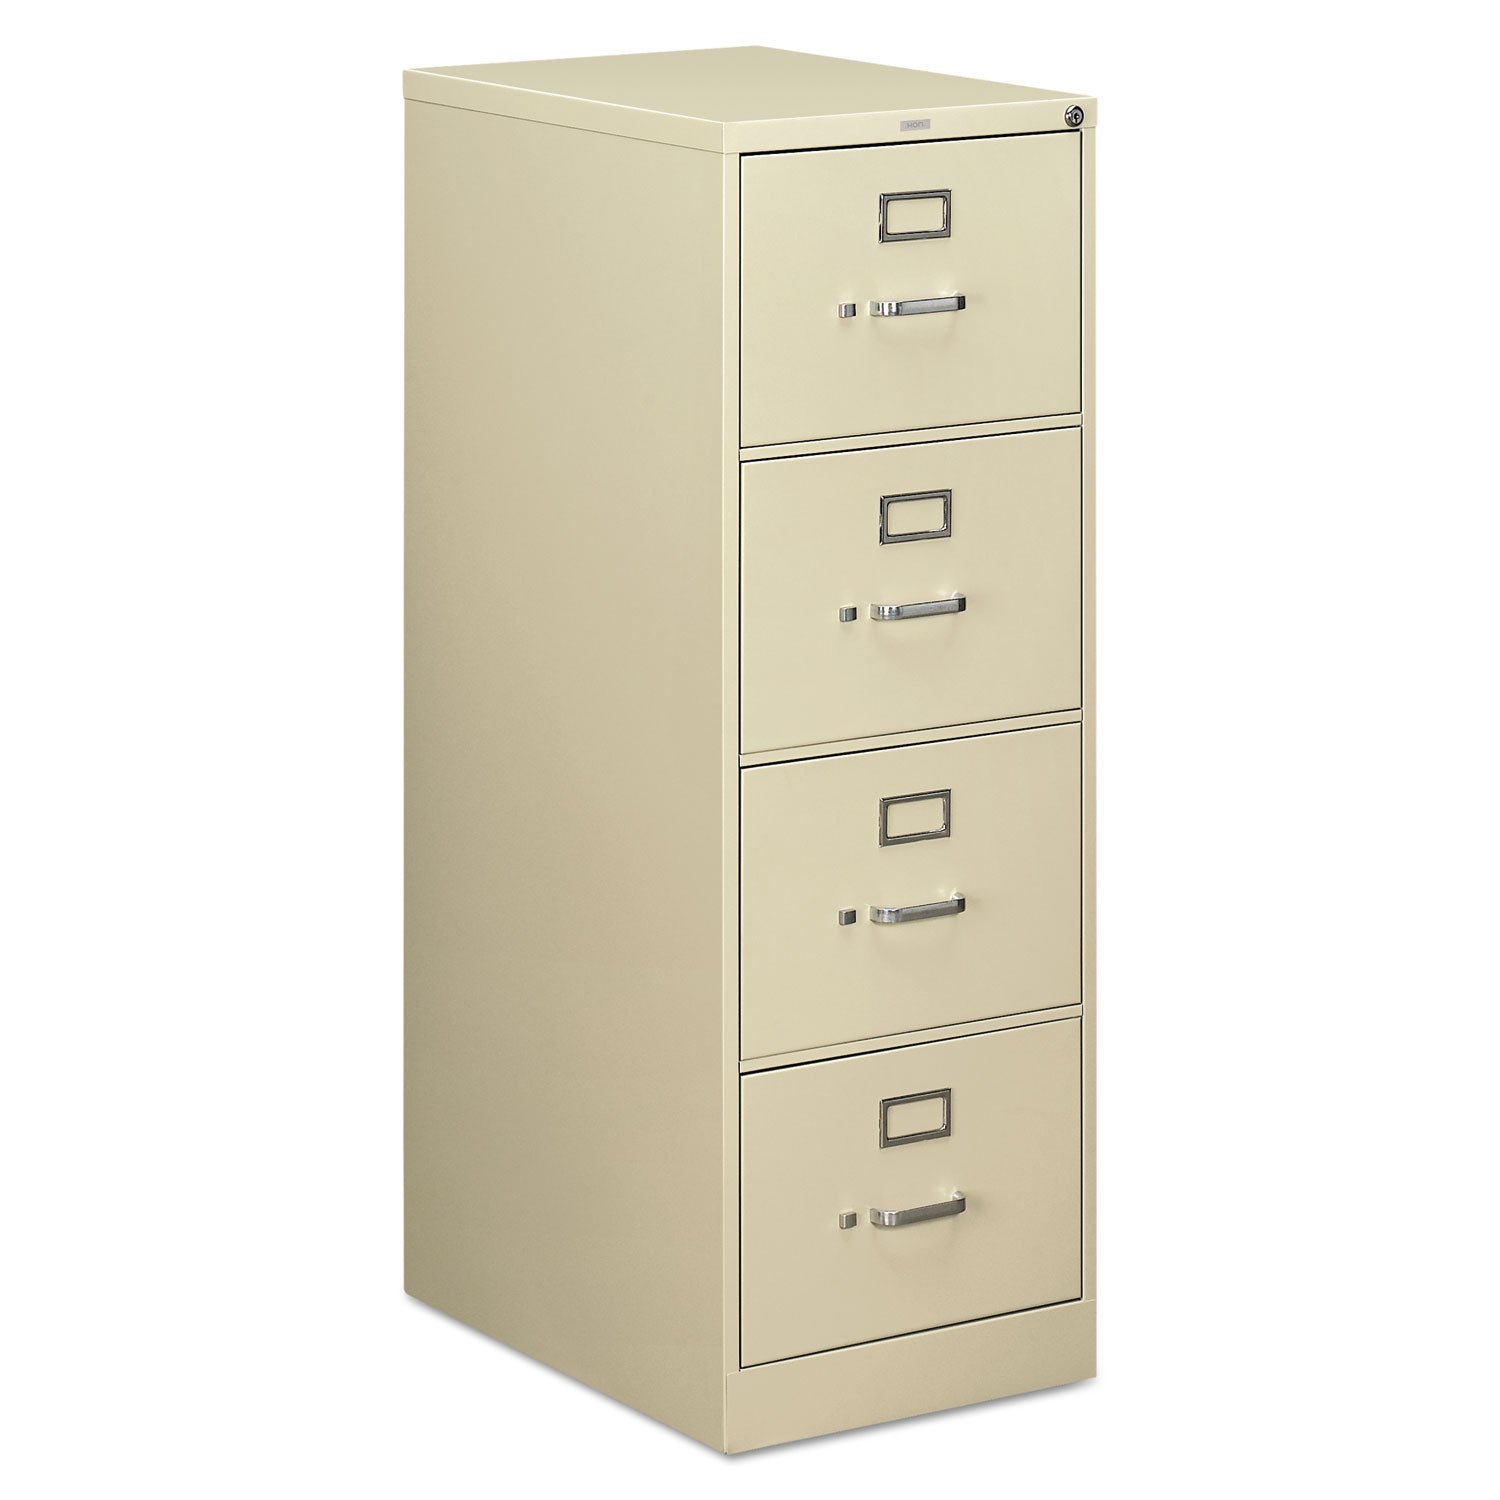 510-series-vertical-file-4-legal-size-file-drawers-putty-1825-x-25-x-52_hon514cpl - 1